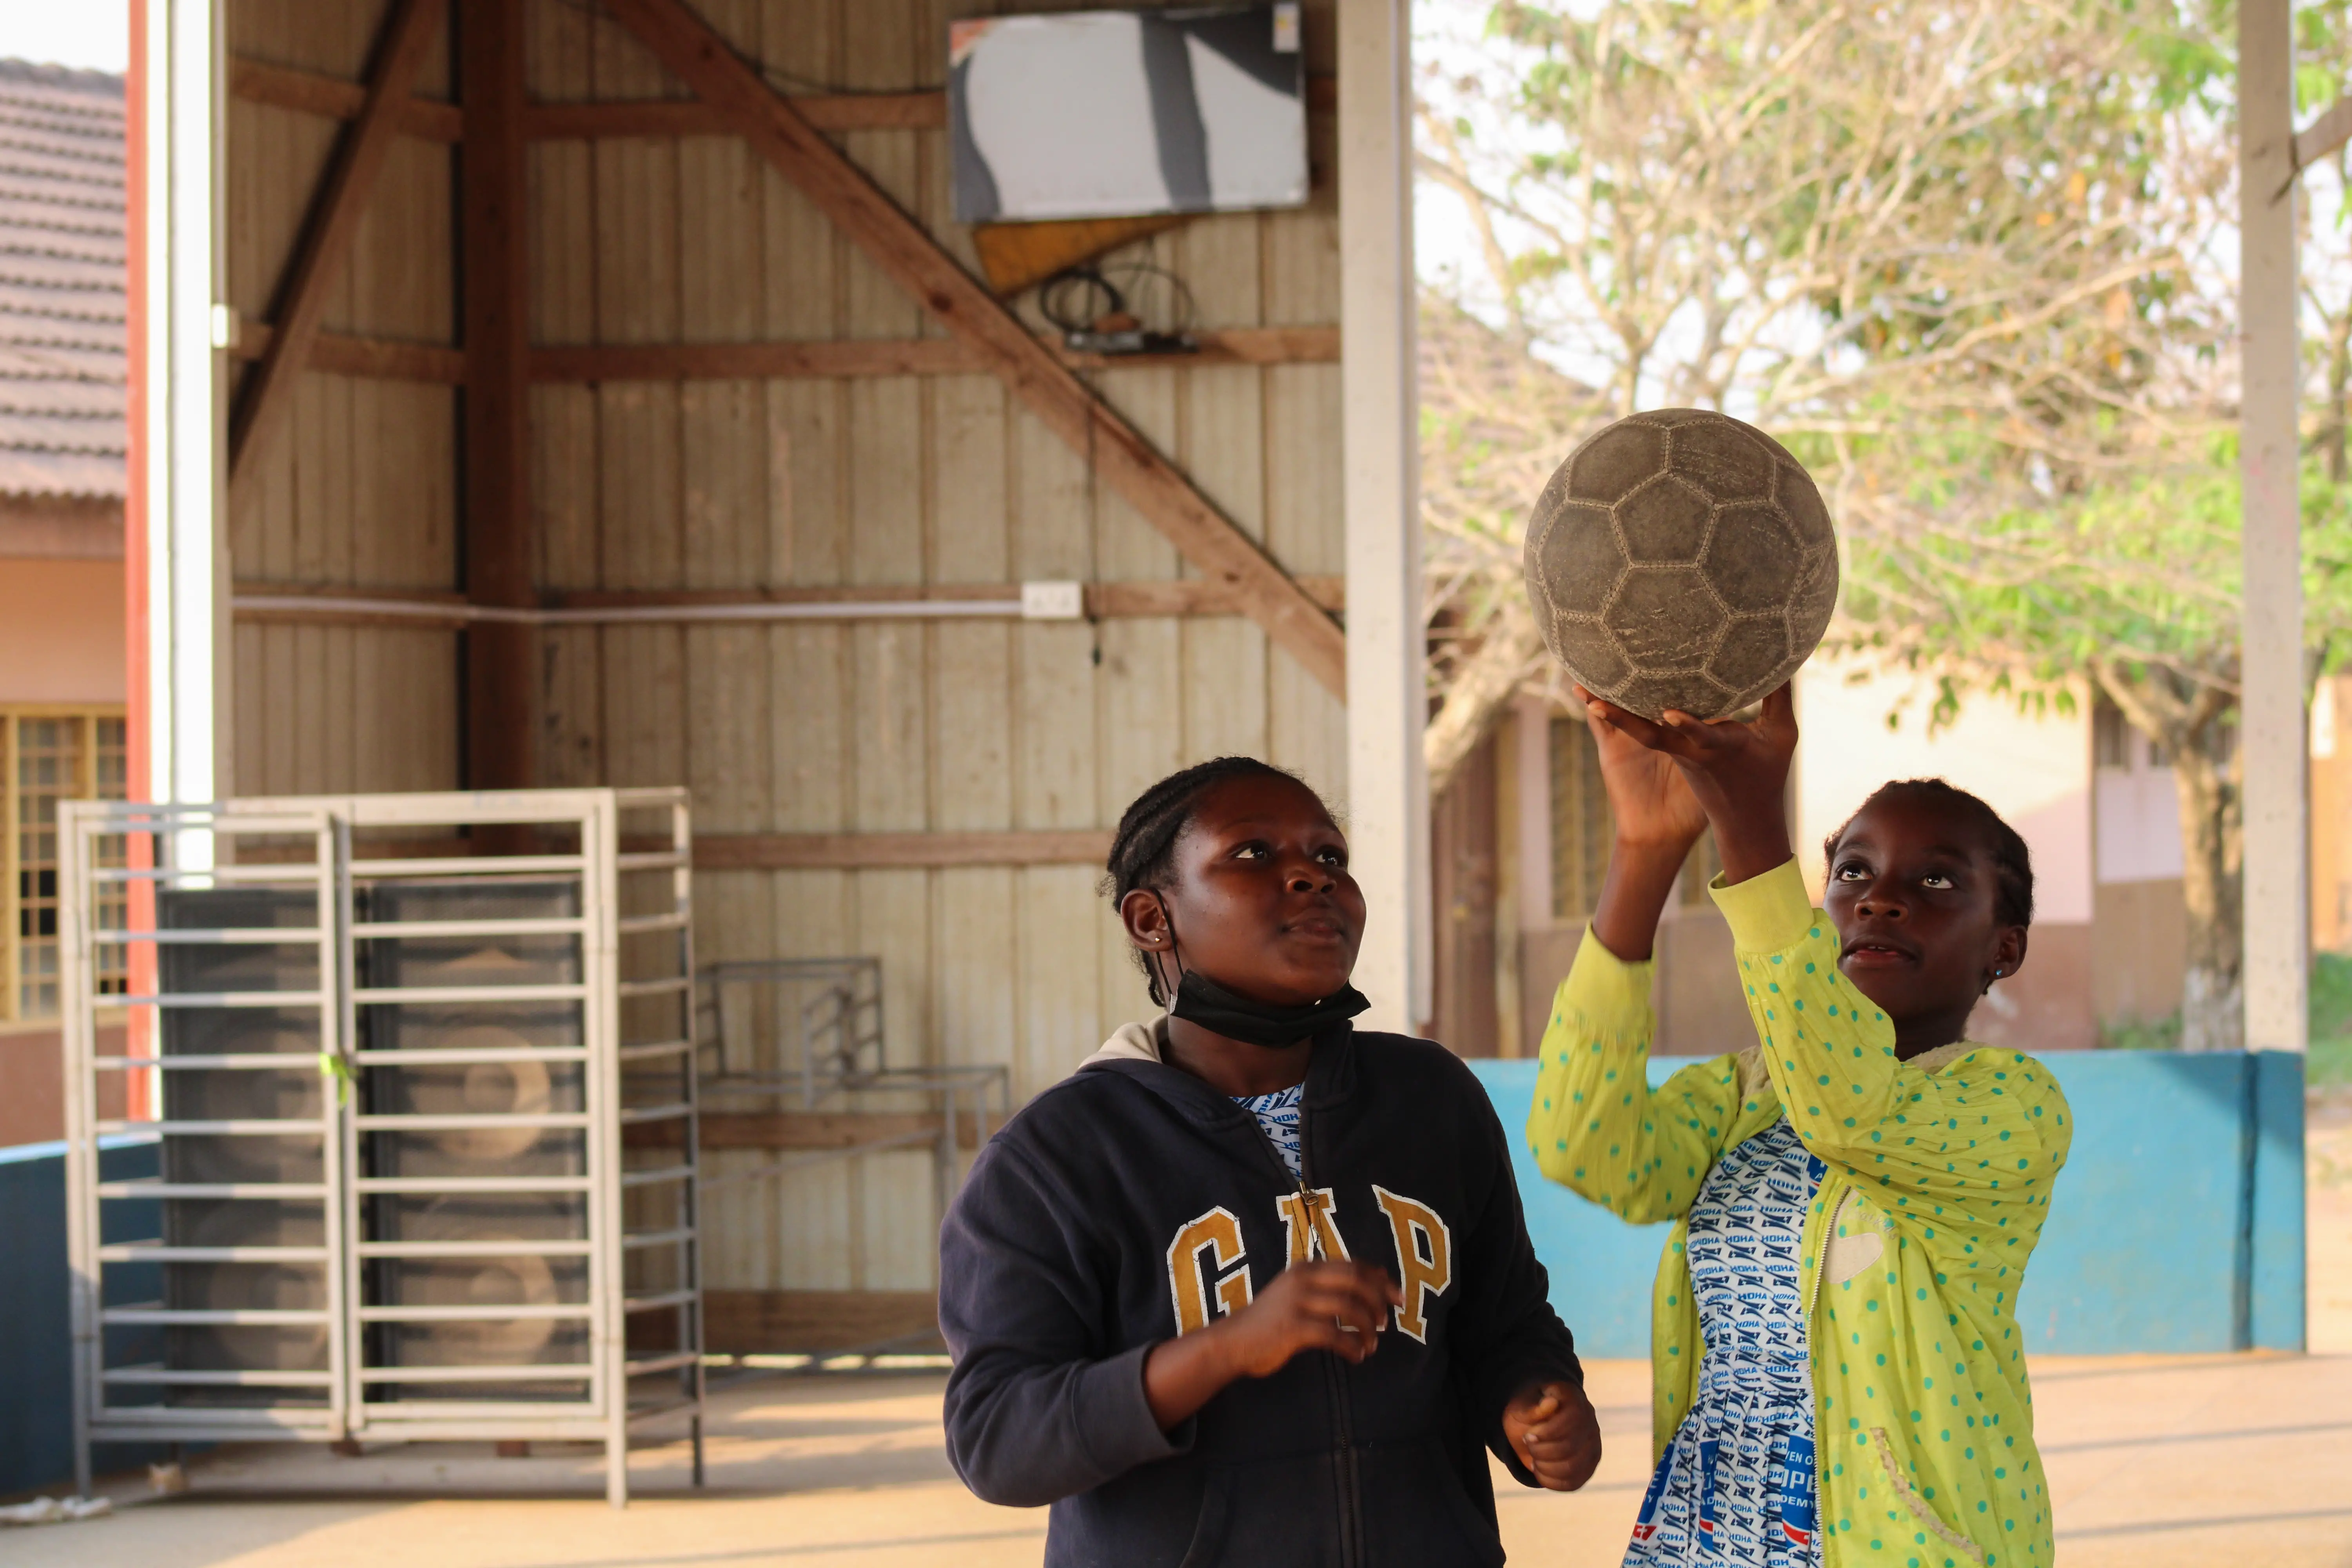 Two girls play basketball with a soccer ball at Haven of Hope’s outdoor recreation area.